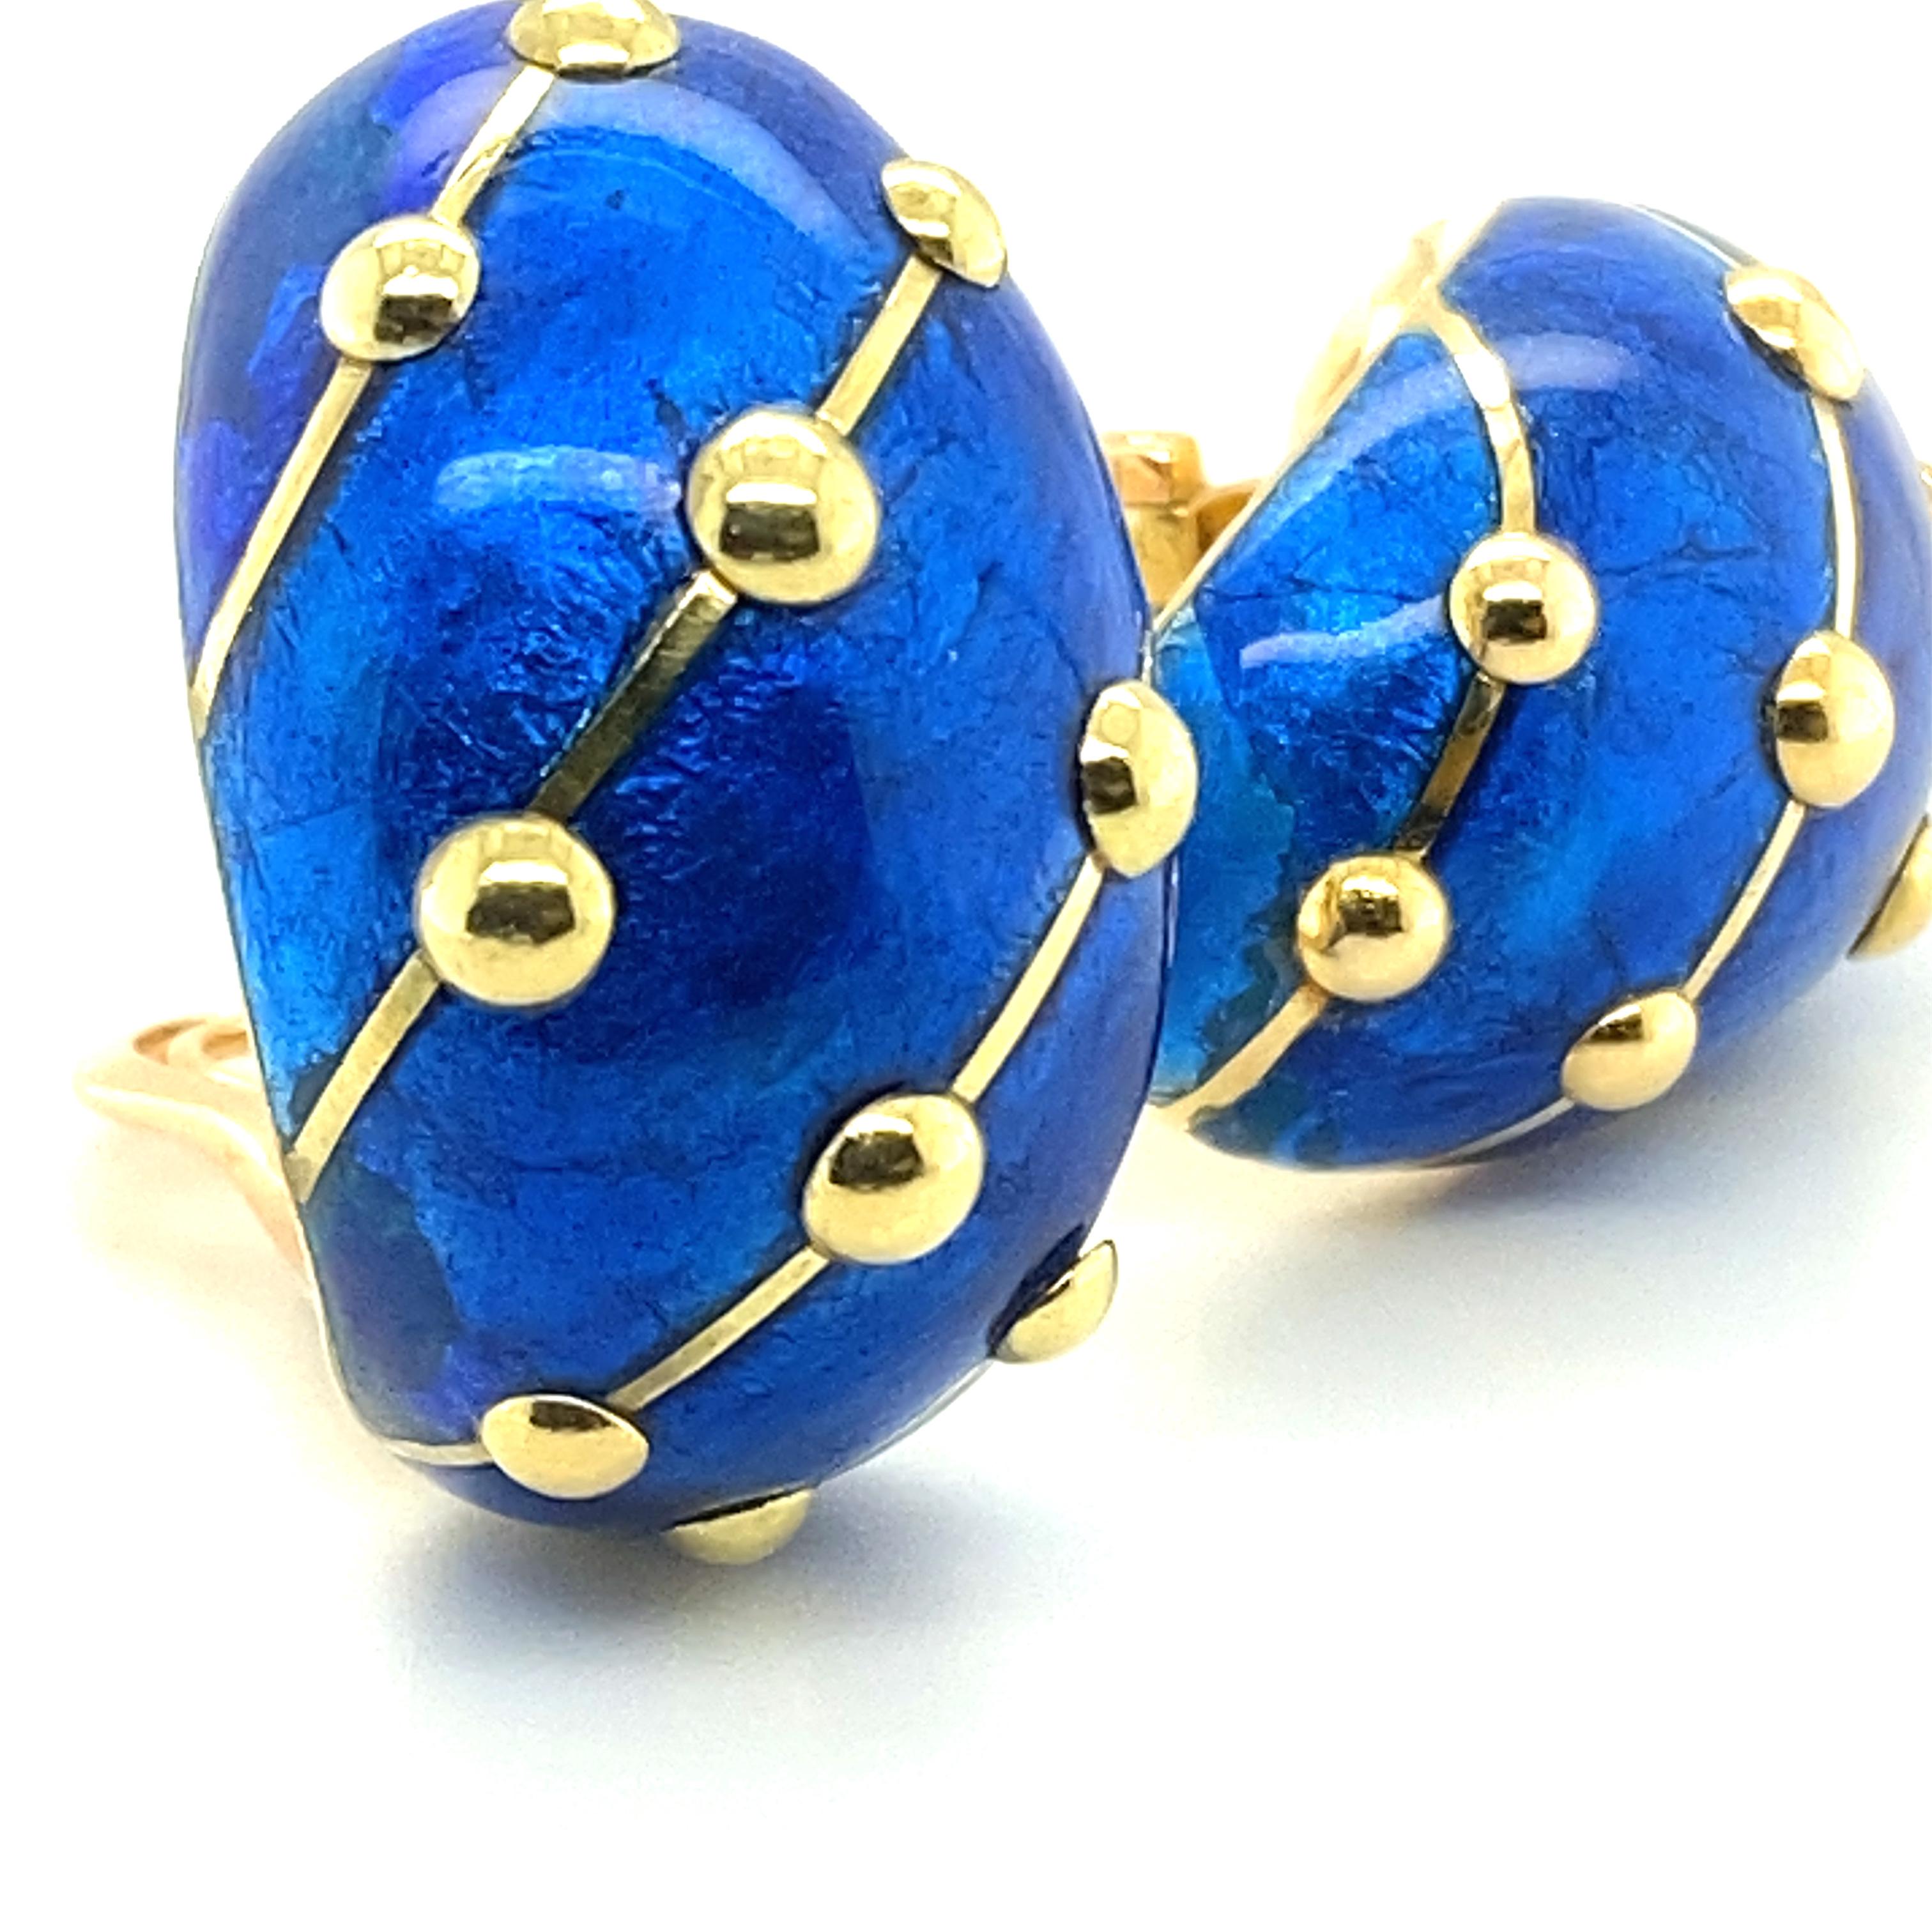 Pair of Gold and Blue Paillonné Enamel 'Banana' Earrings by Jean Schlumberger 1